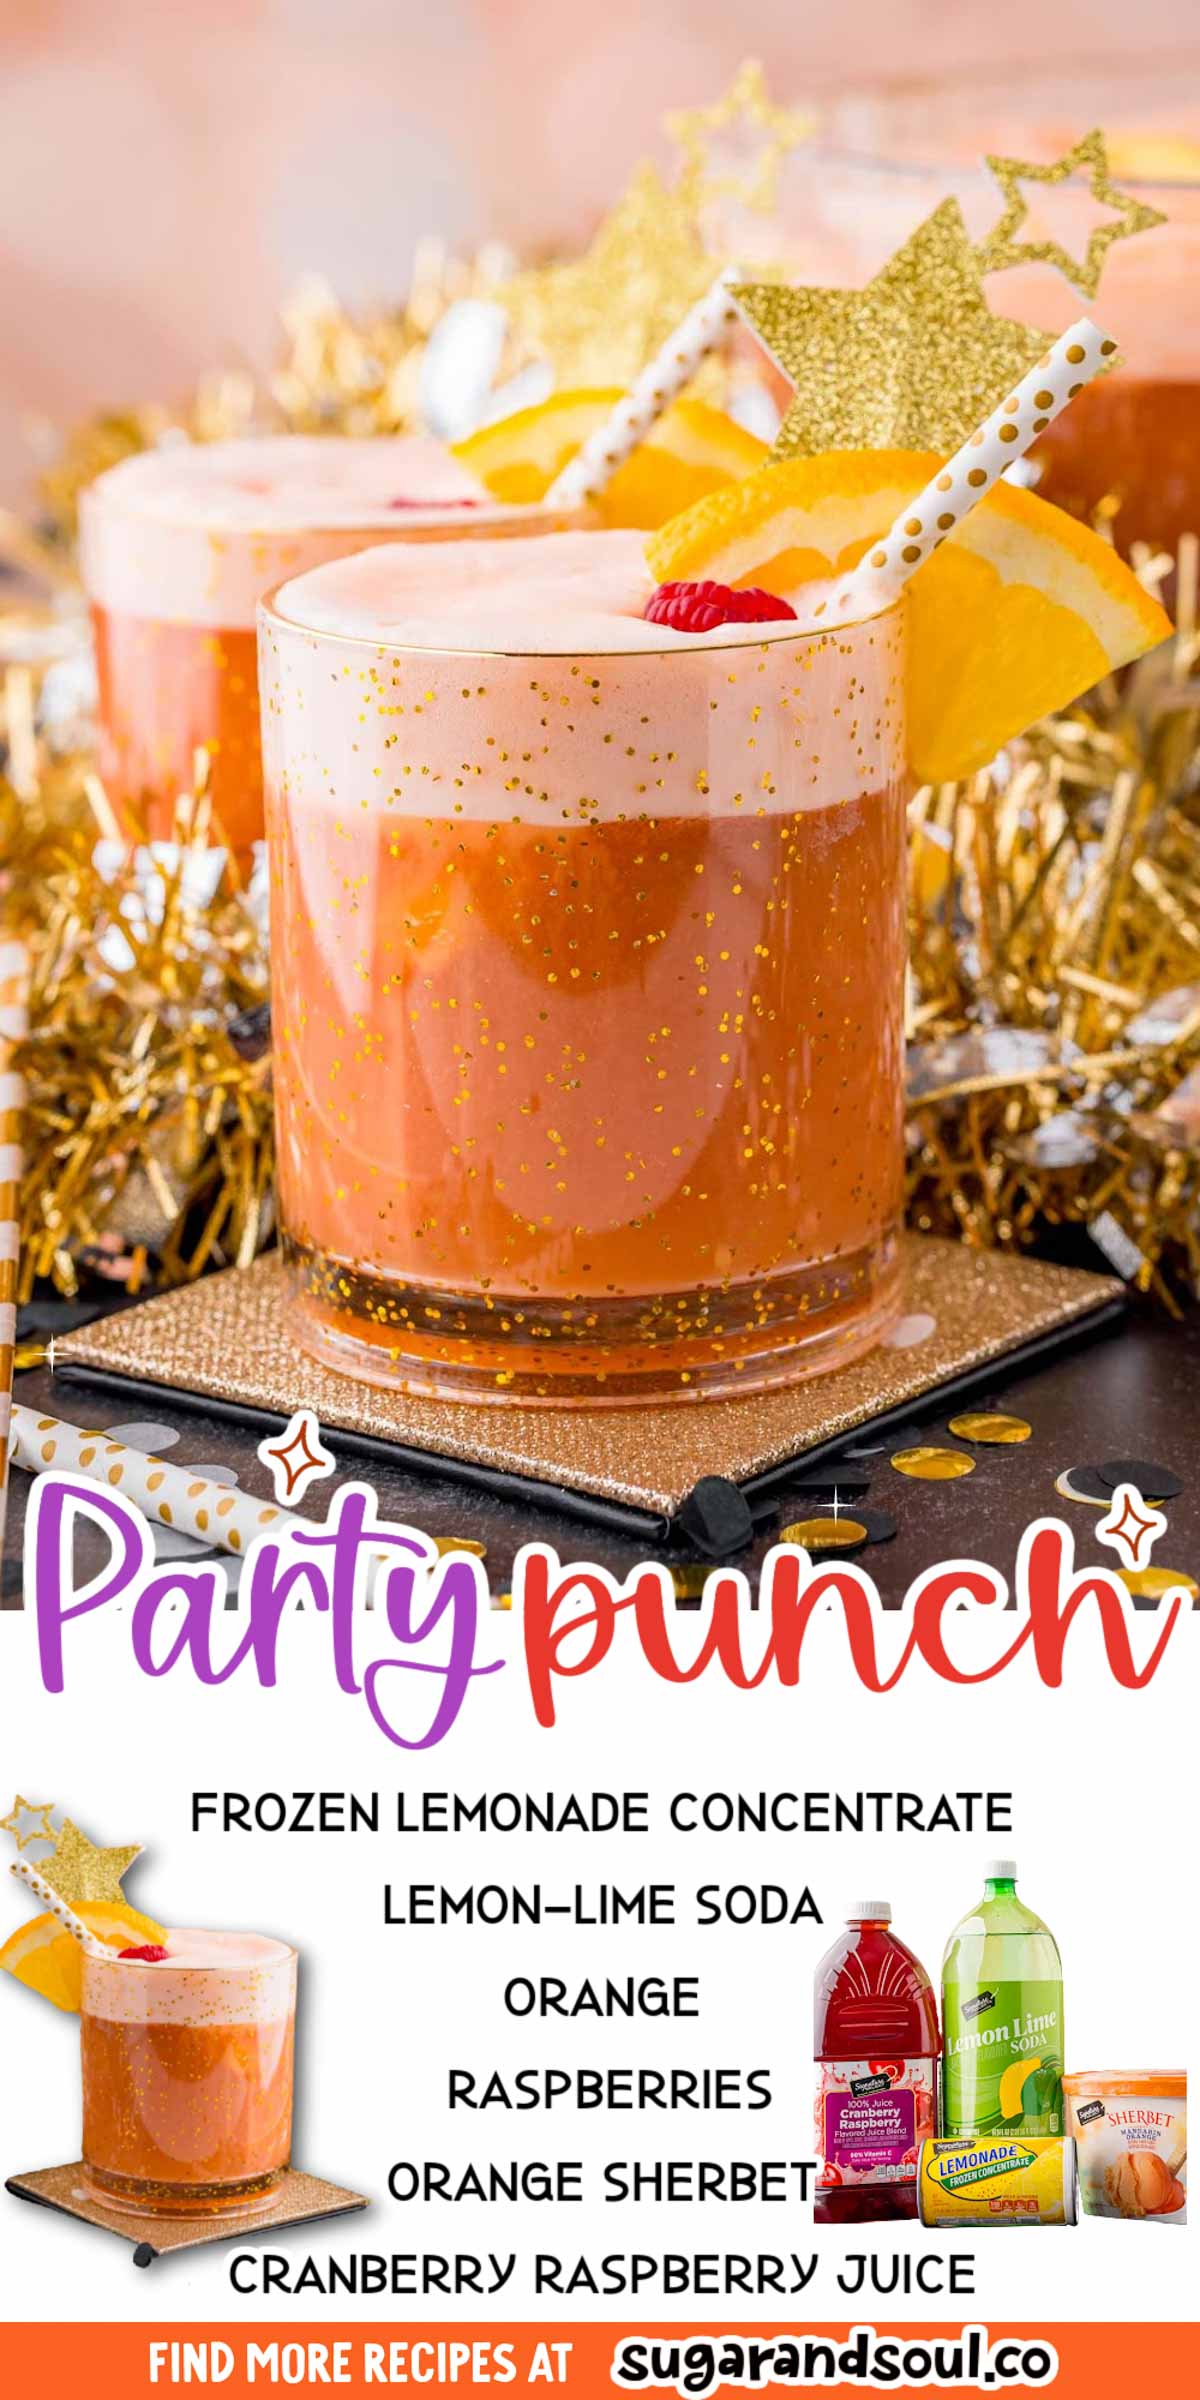 This Easy Party Punch is a crowd-pleasing, family-friendly drink that's made with 3 easy ingredients and then topped with orange sherbet! Ready to serve and enjoy in only 5 minutes! via @sugarandsoulco